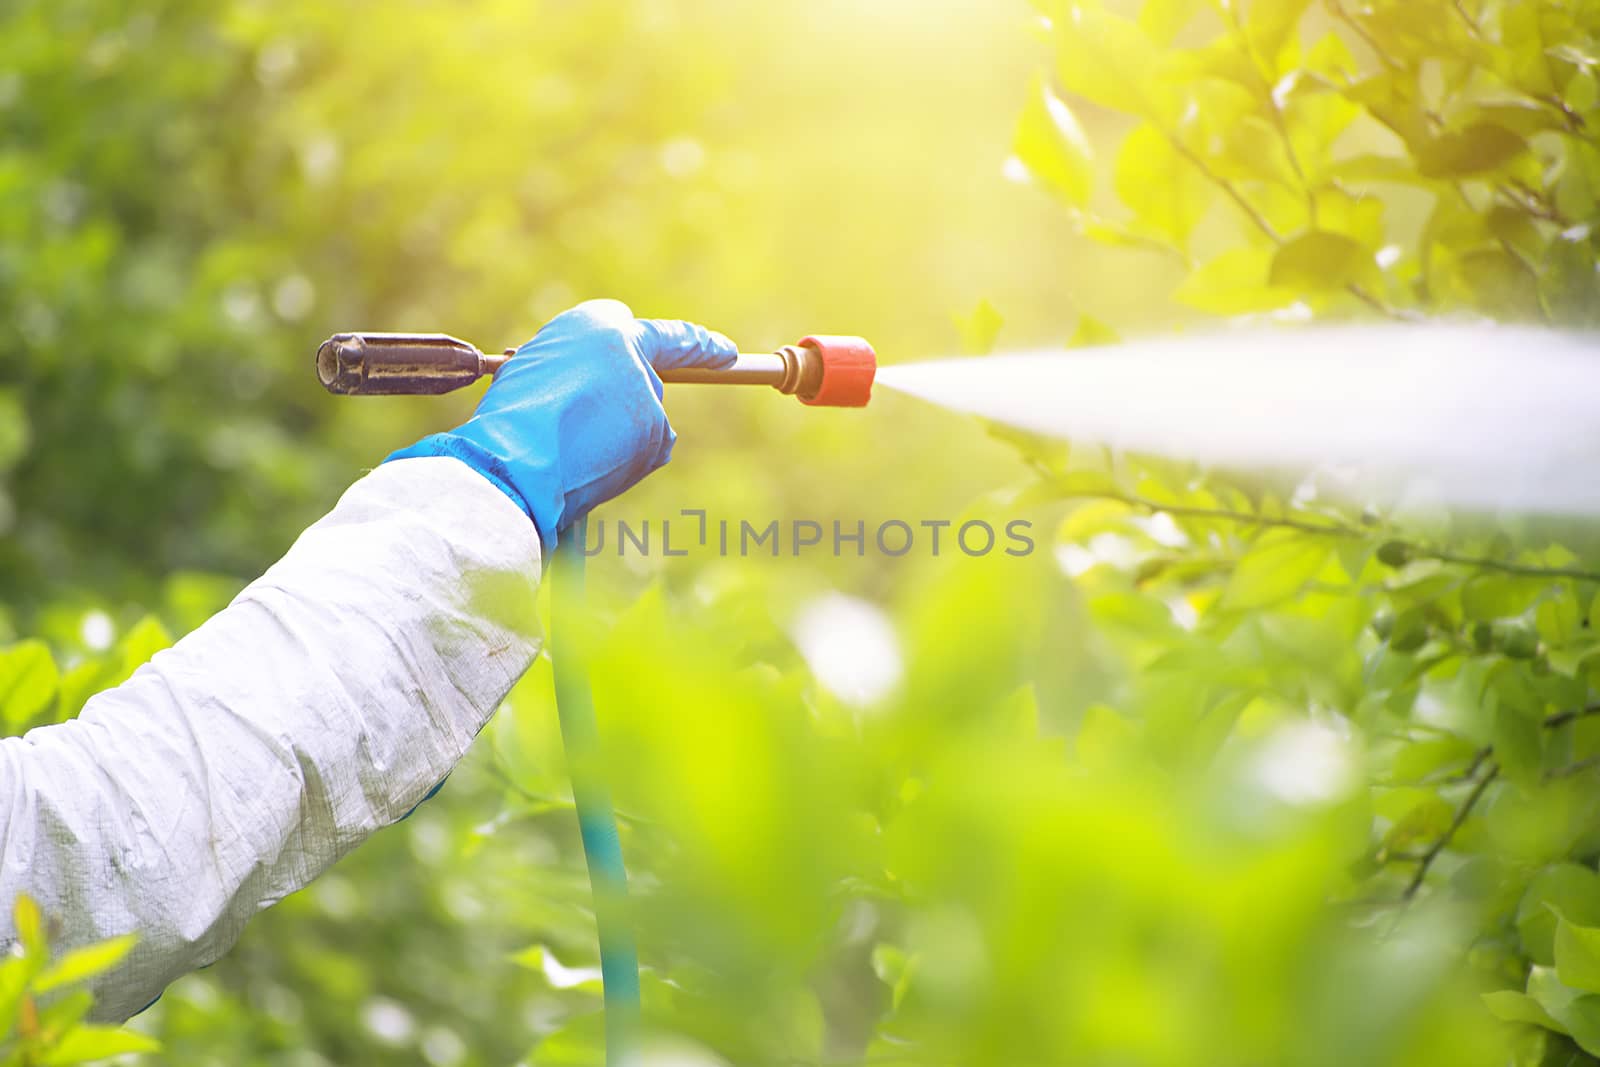 Spray ecological pesticide. Farmer fumigate in protective suit and mask lemon trees. Man spraying toxic pesticides, pesticide, insecticides by worledit